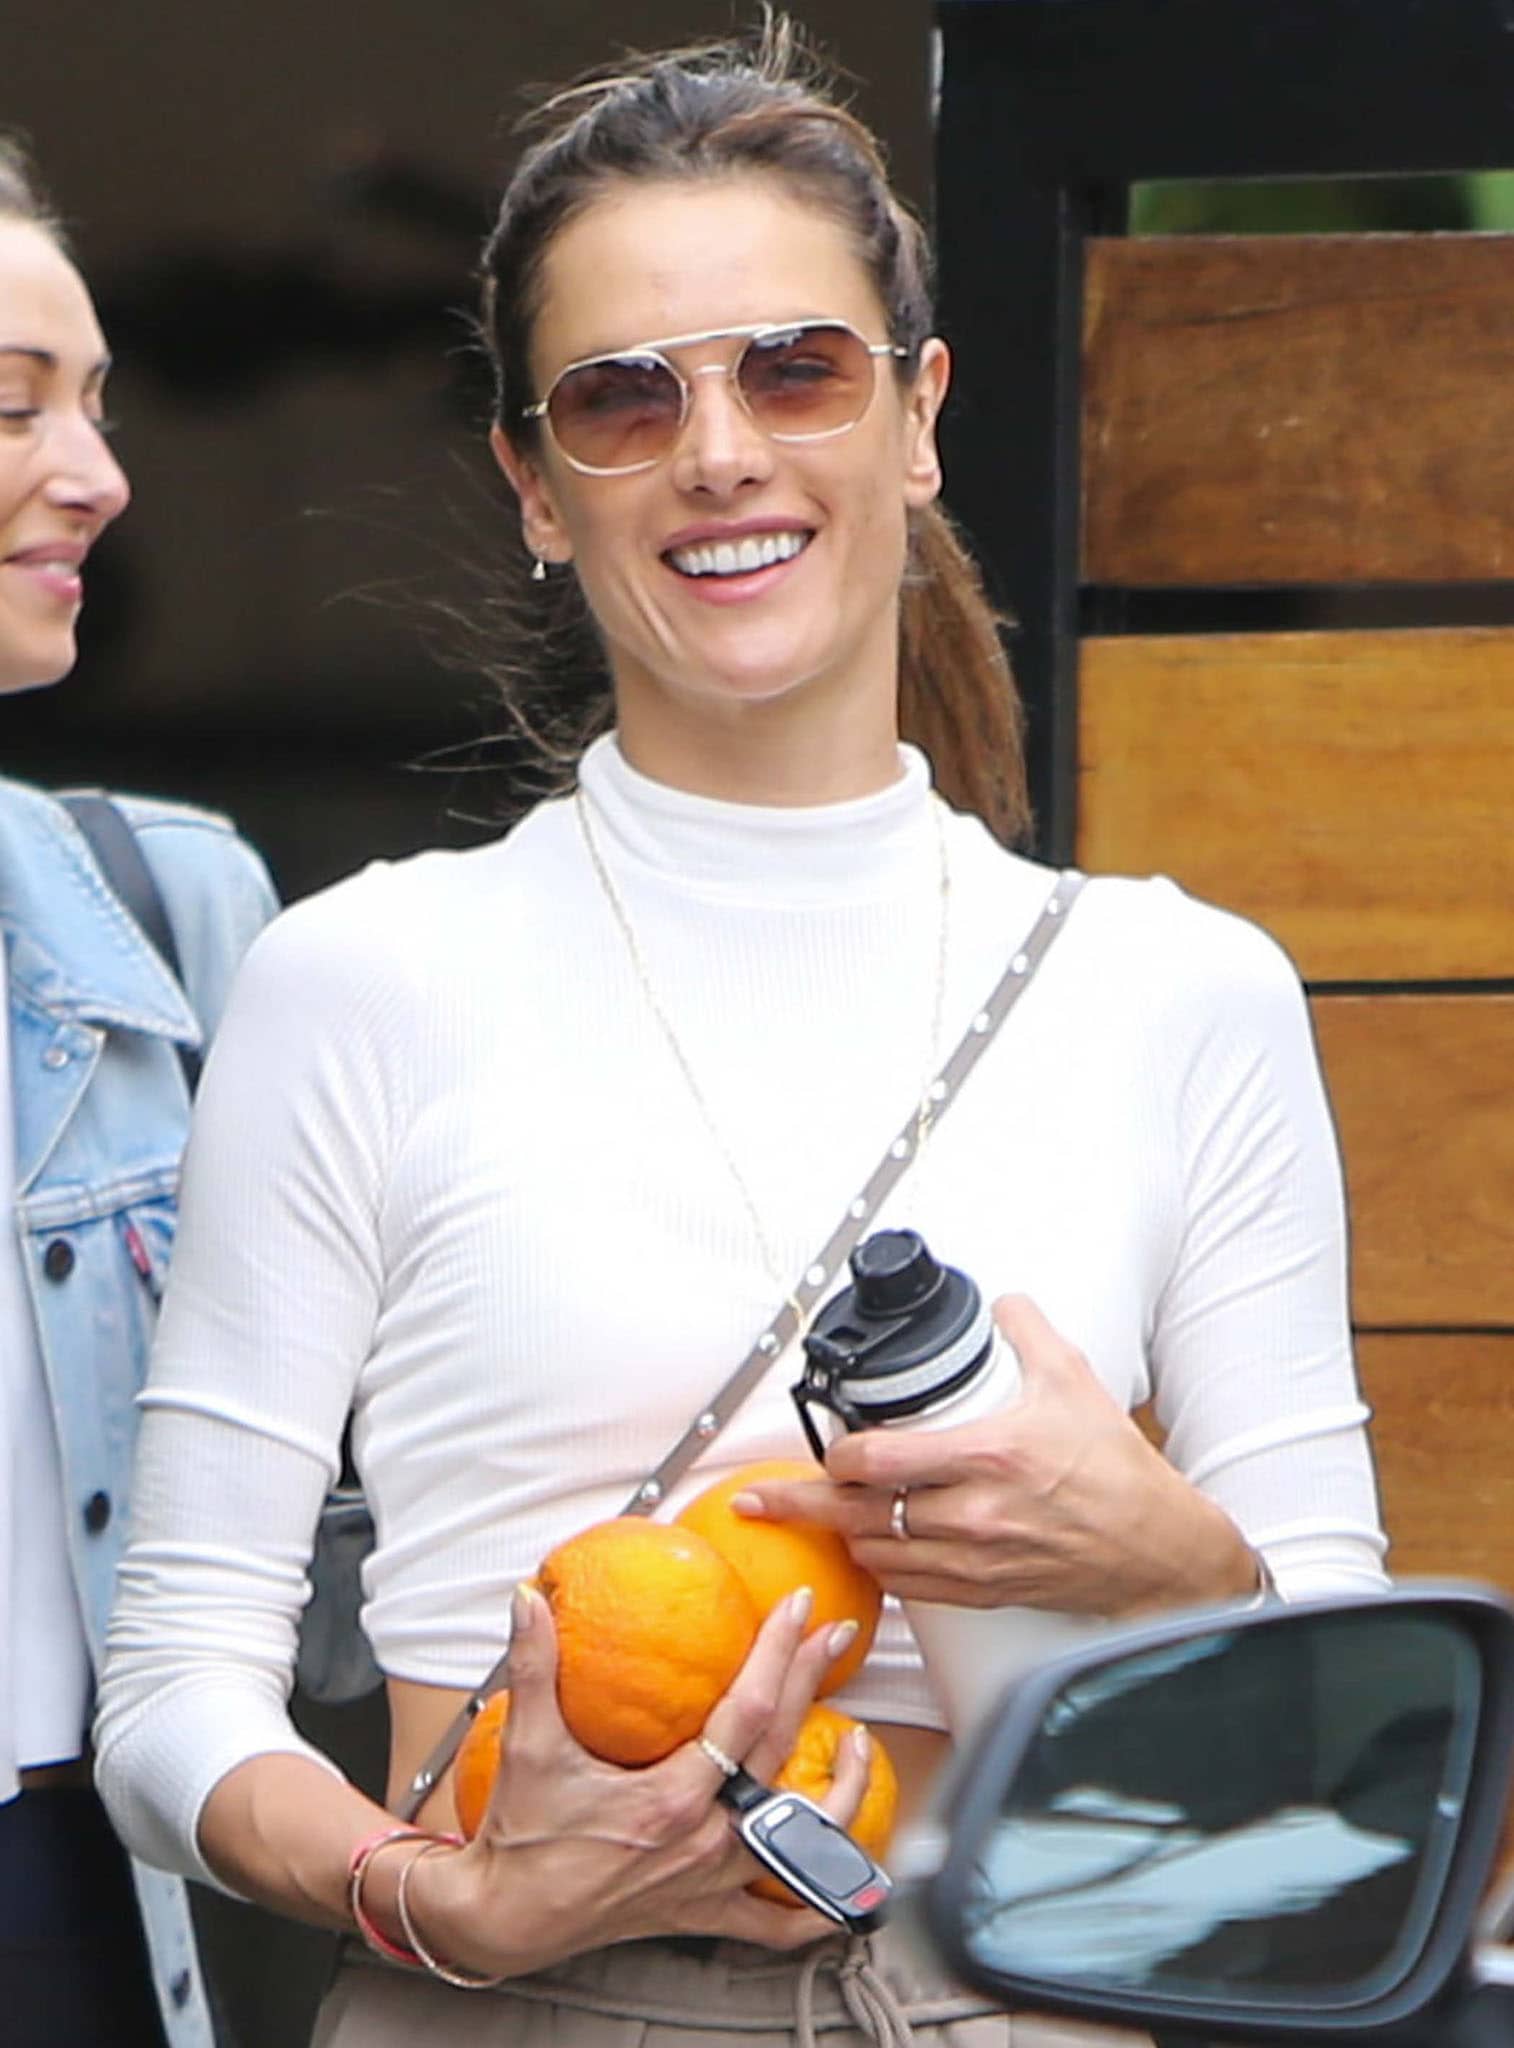 Alessandra Ambrosio flashes her pearly whites and shields her eyes behind a pair of Vehla Artesia sunnies